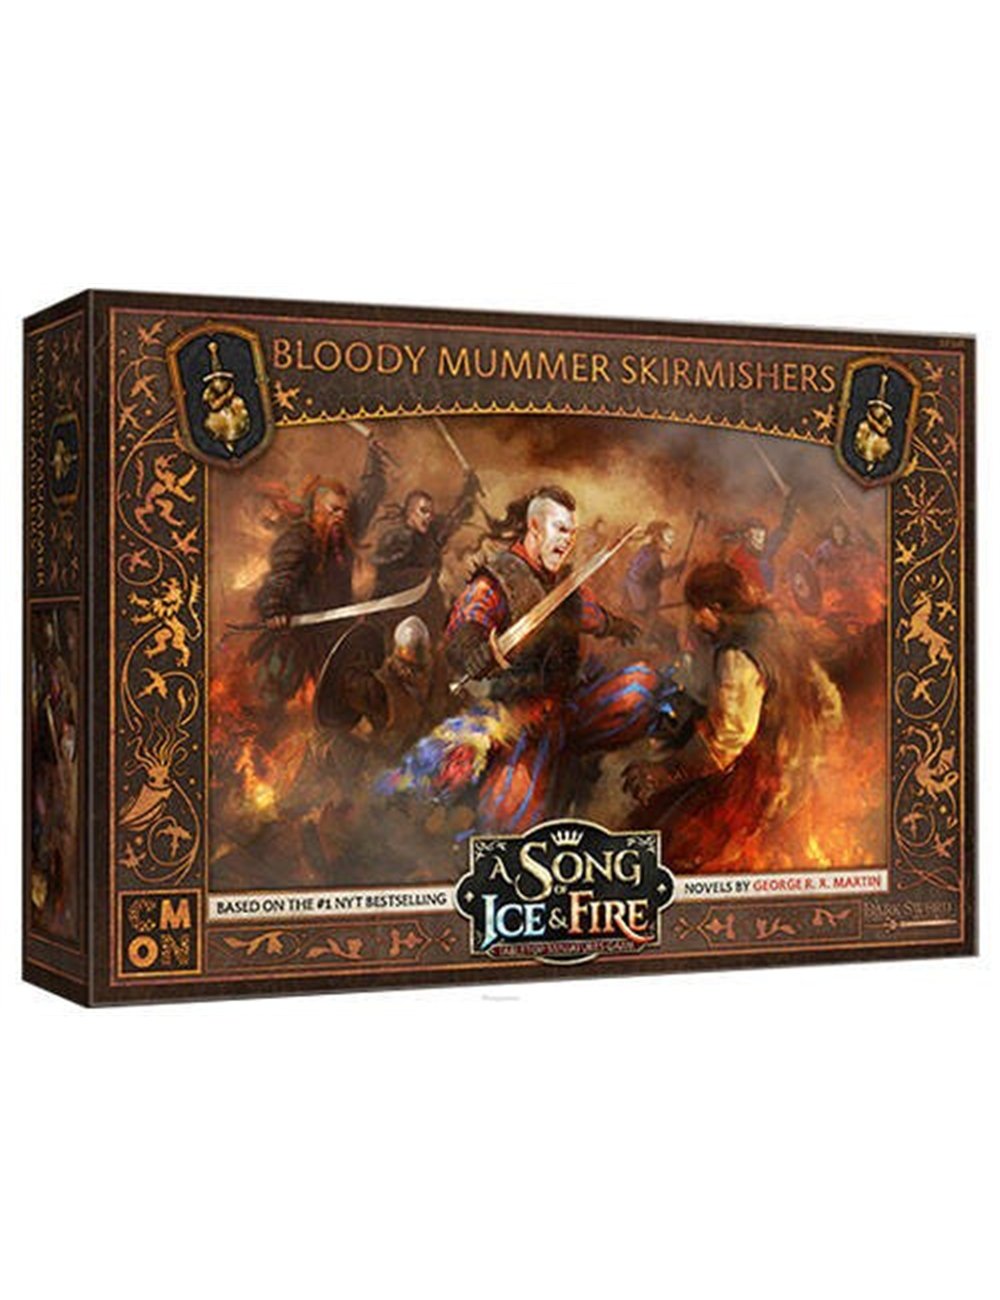 A SONG OF ICE & FIRE - Bloody Mummer Skirmishers PL